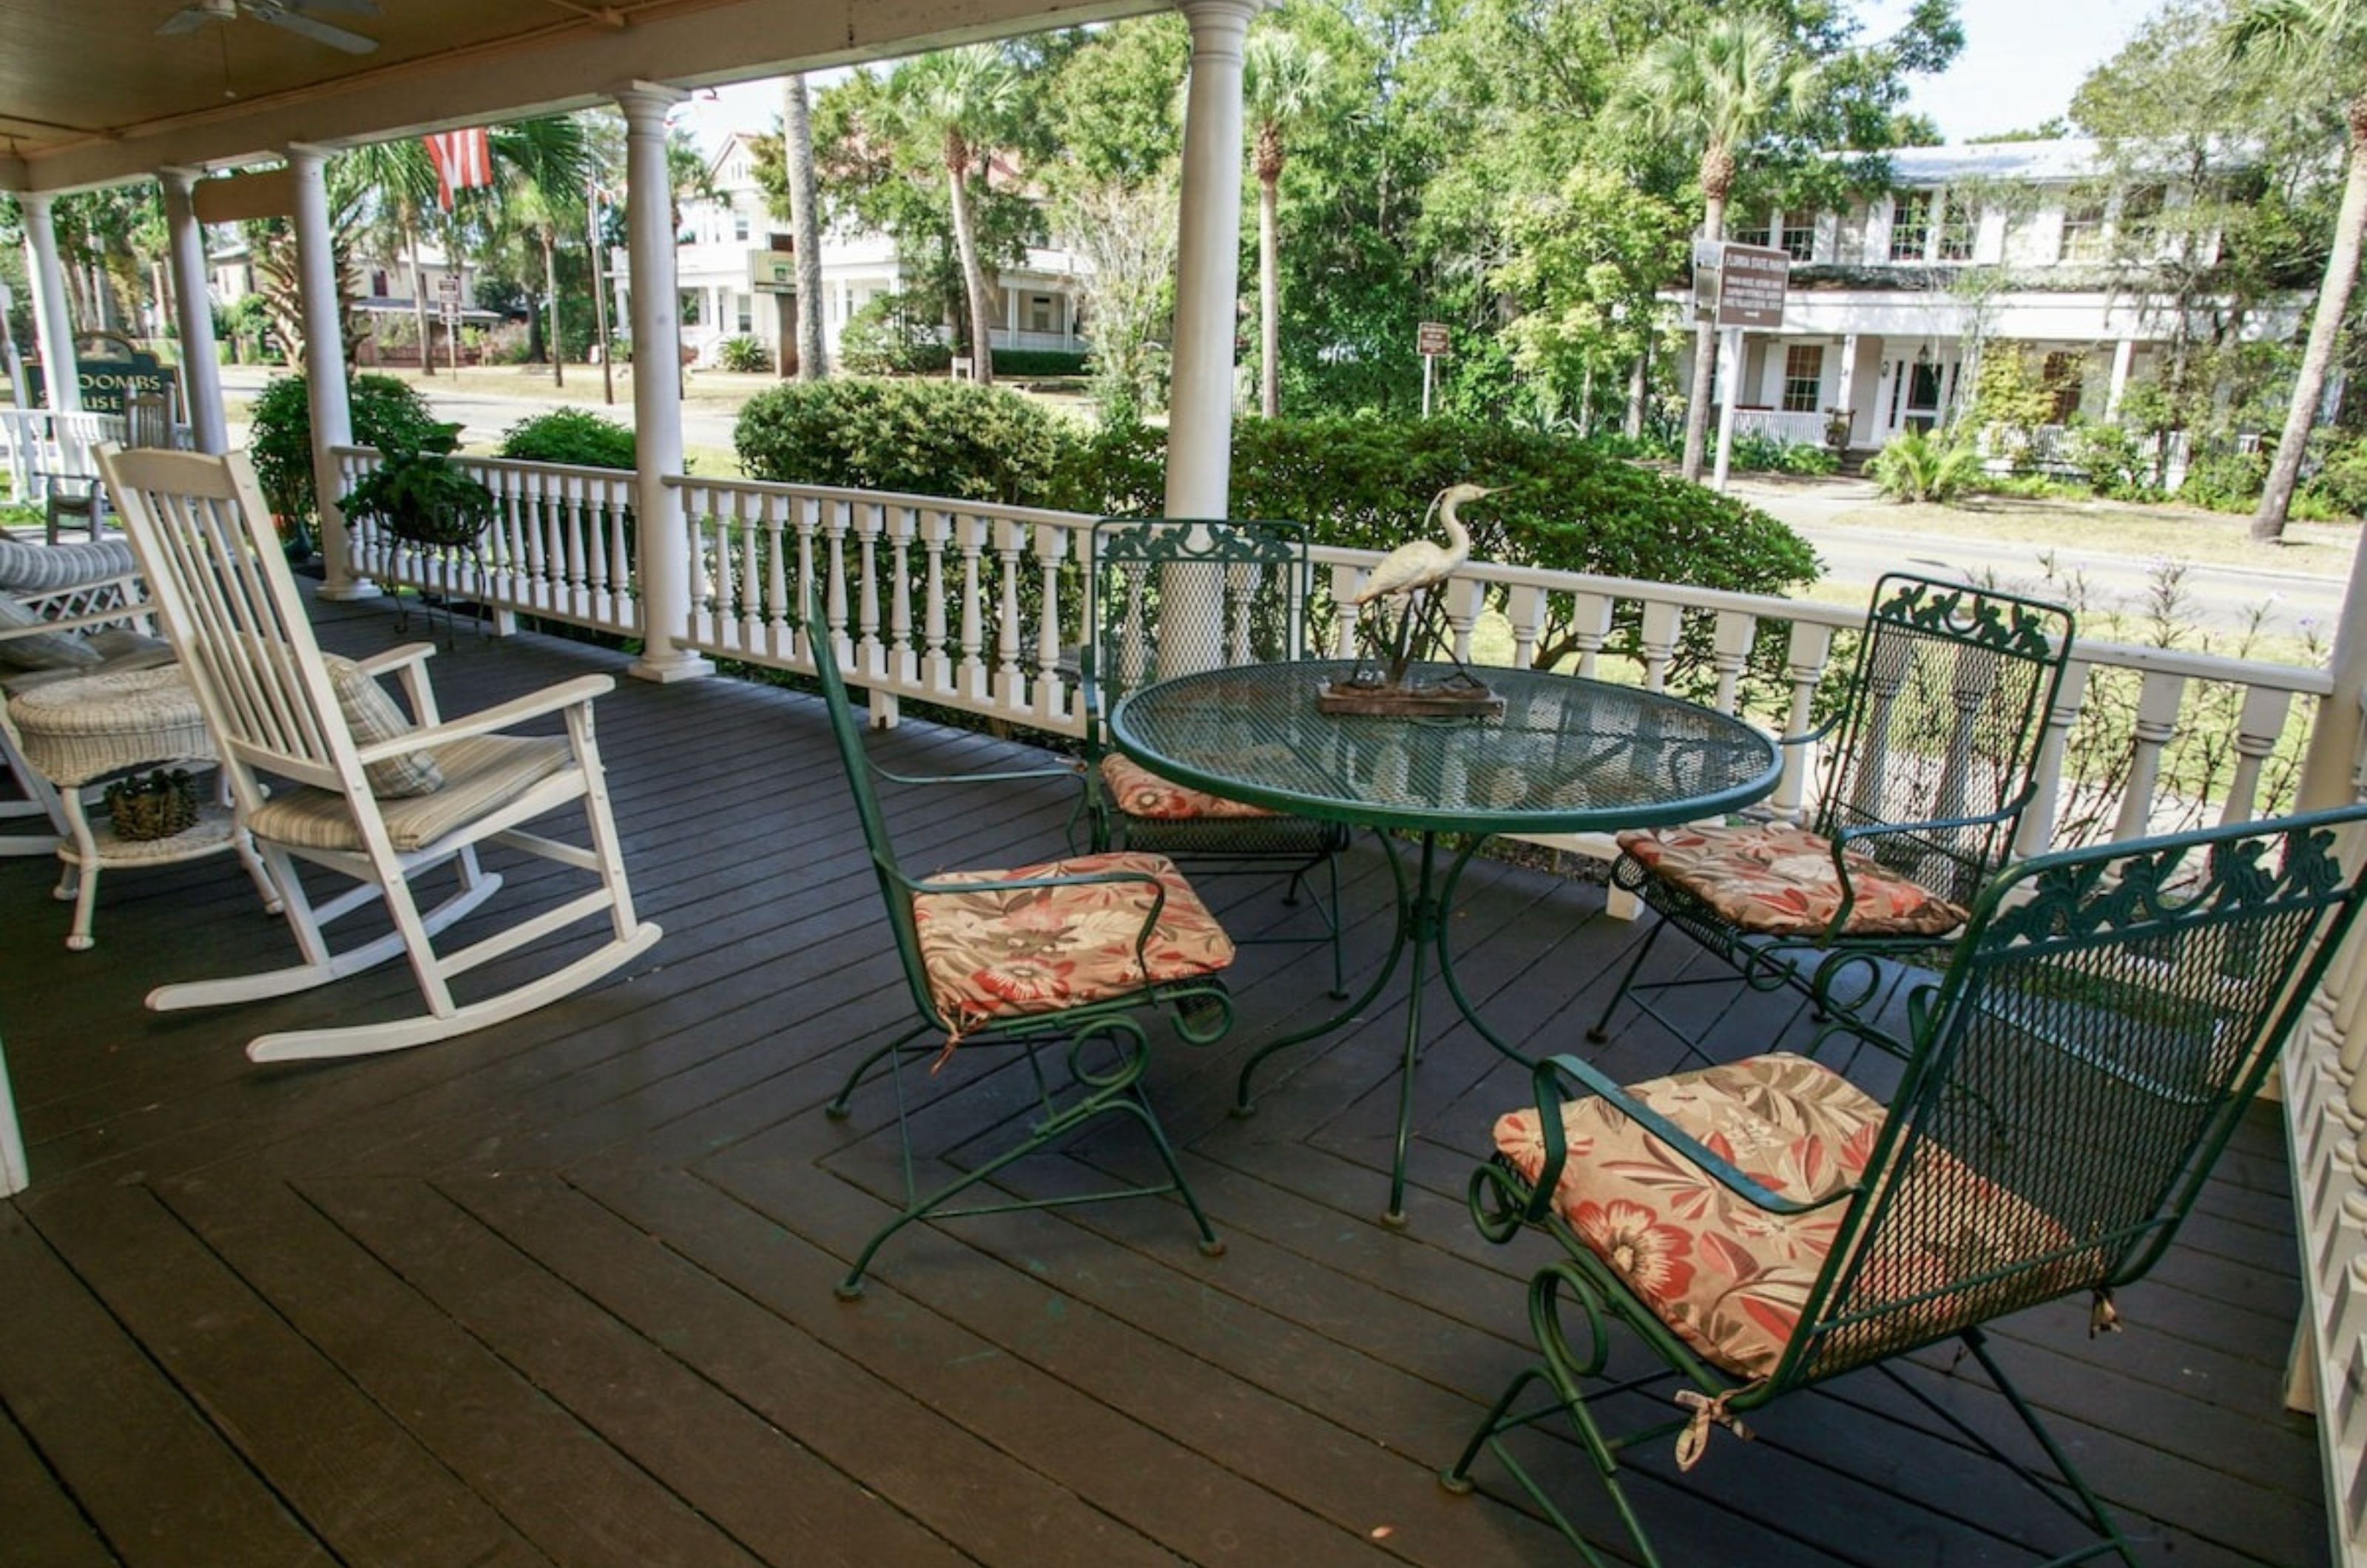 The rocking chairs and tables on the relaxing porch 